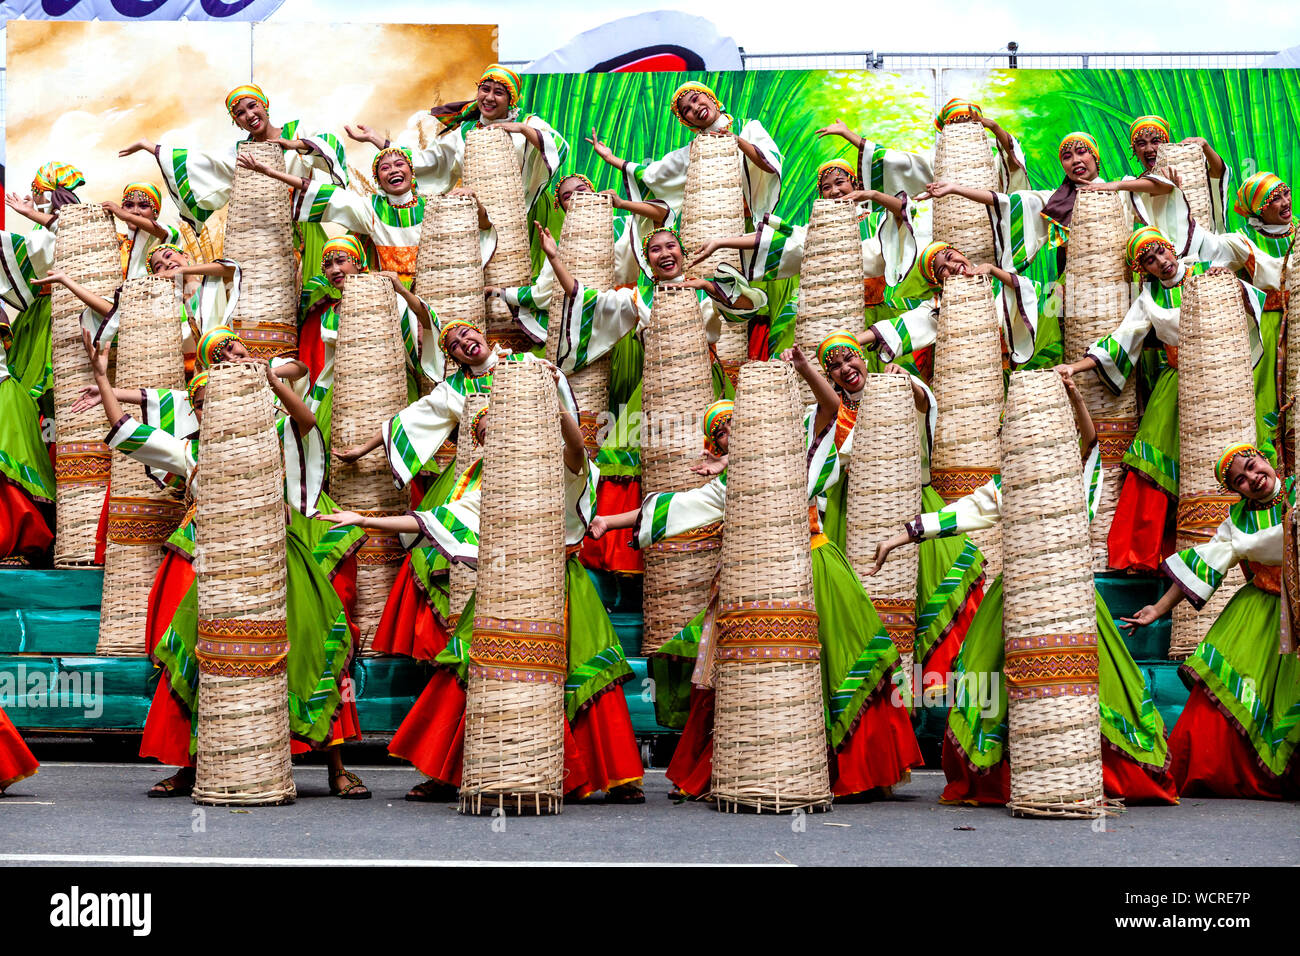 Young Filipino Women Dancing In The Kasadyahan Contest, Dinagyang Festival, Iloilo City, Panay Island, The Philippines. Stock Photo